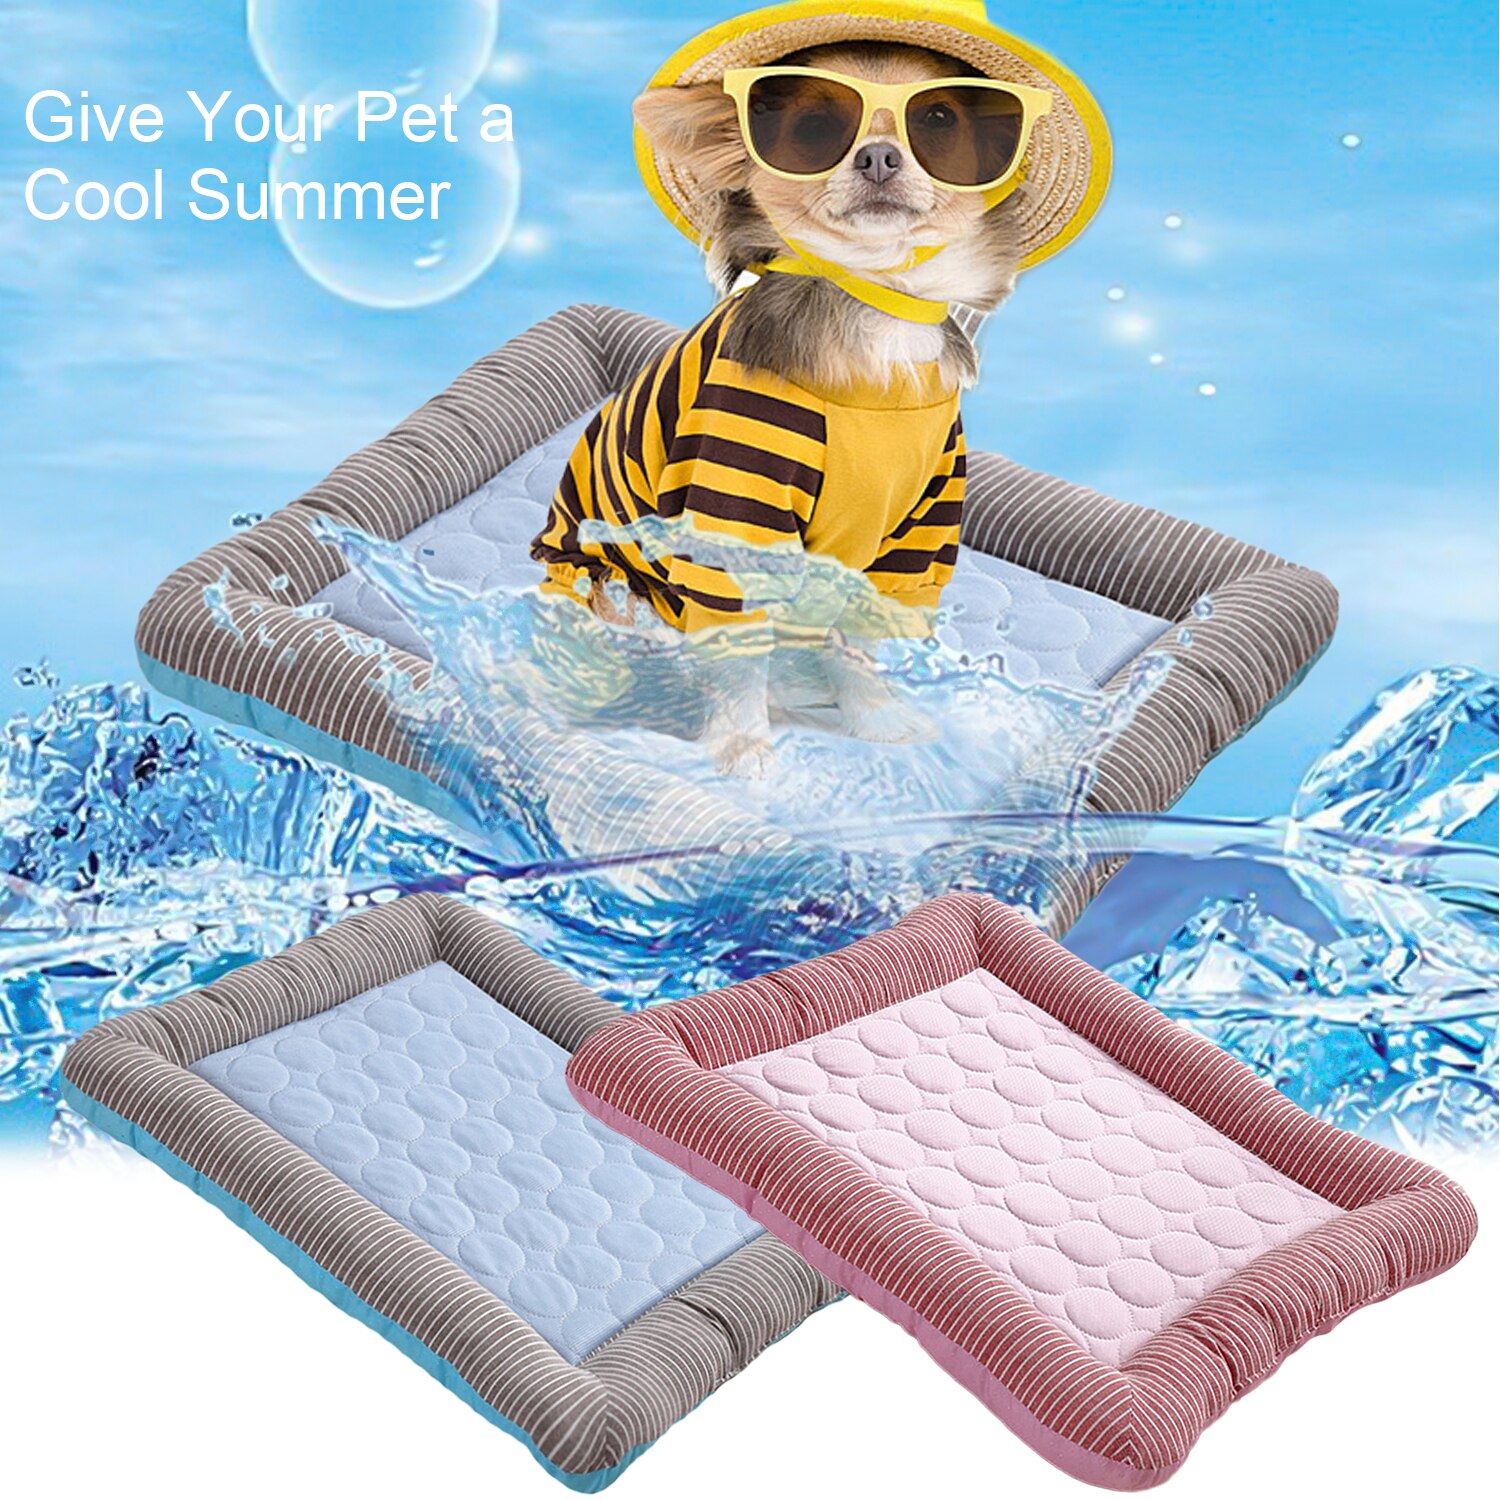 Dog Cooling Bed Summer Breathable Sleeping Cool Ice Pad Mat Cushion for Small Pet Dog Cat Puppy 54 x 43cm